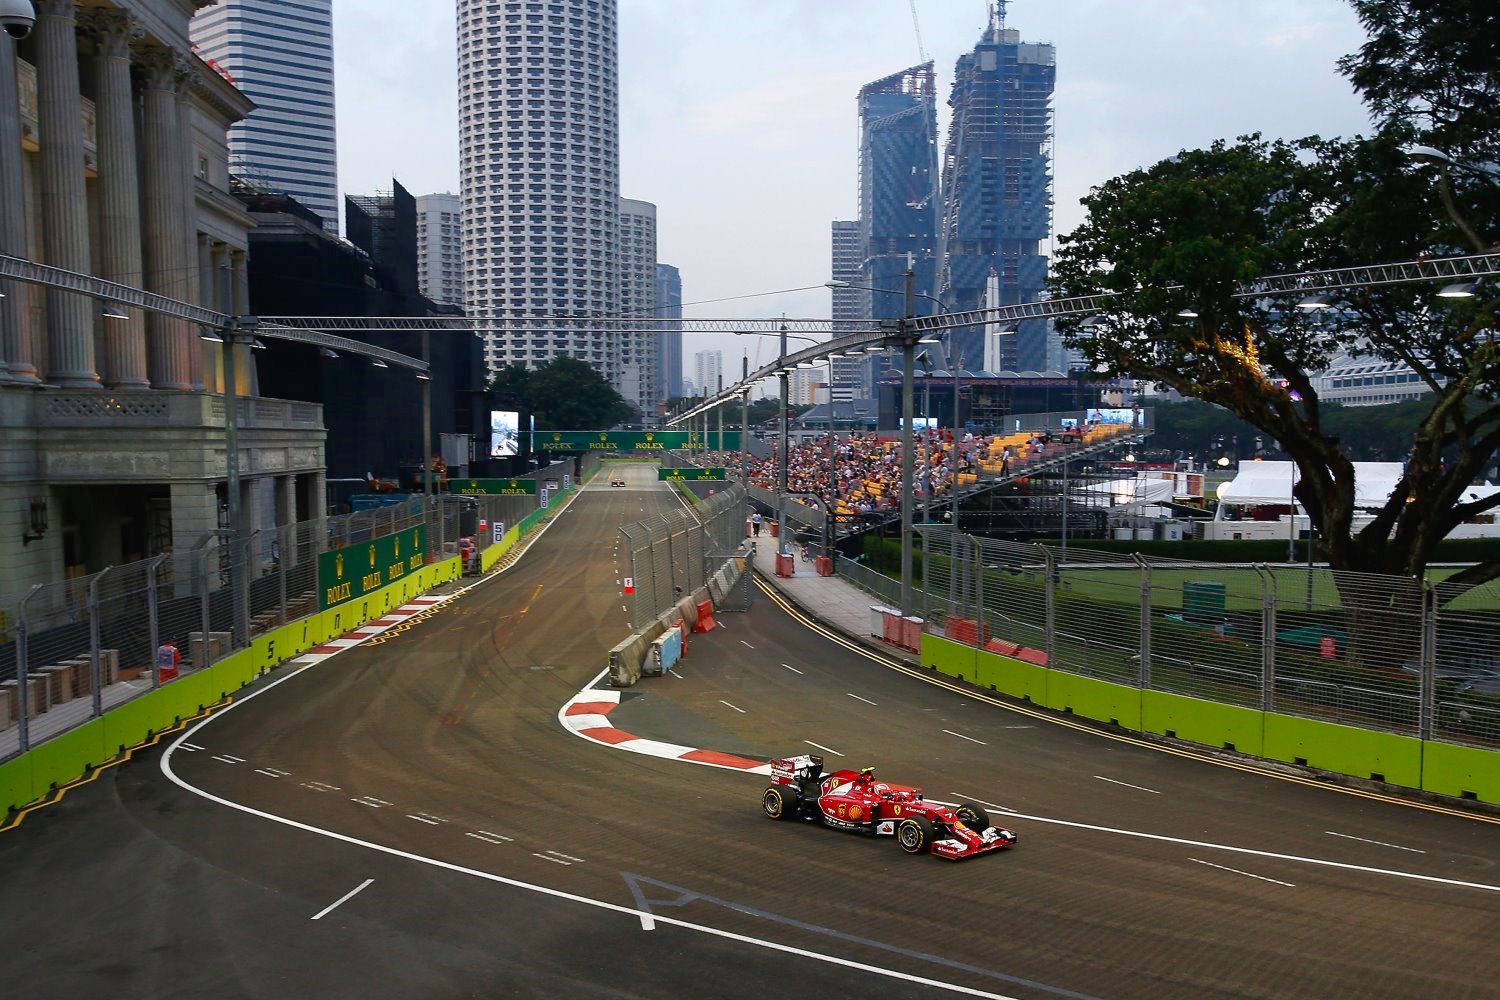 Plan to bomb Singapore race foiled